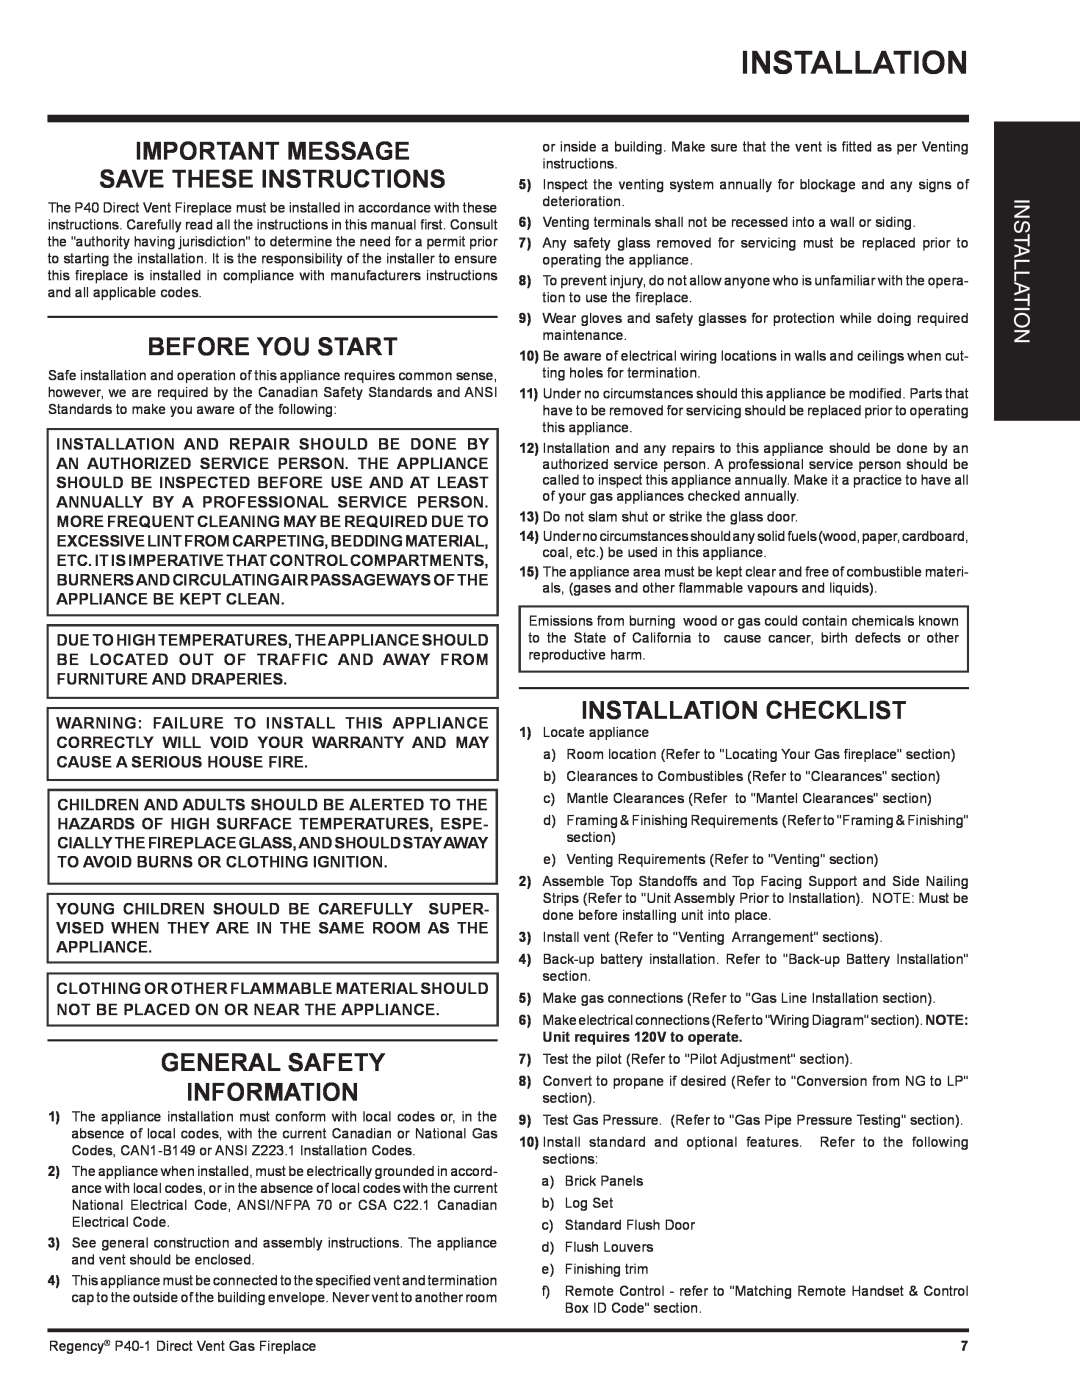 Regency P40-LP1 Important Message Save These Instructions, Before You Start, General Safety Information, Installation 